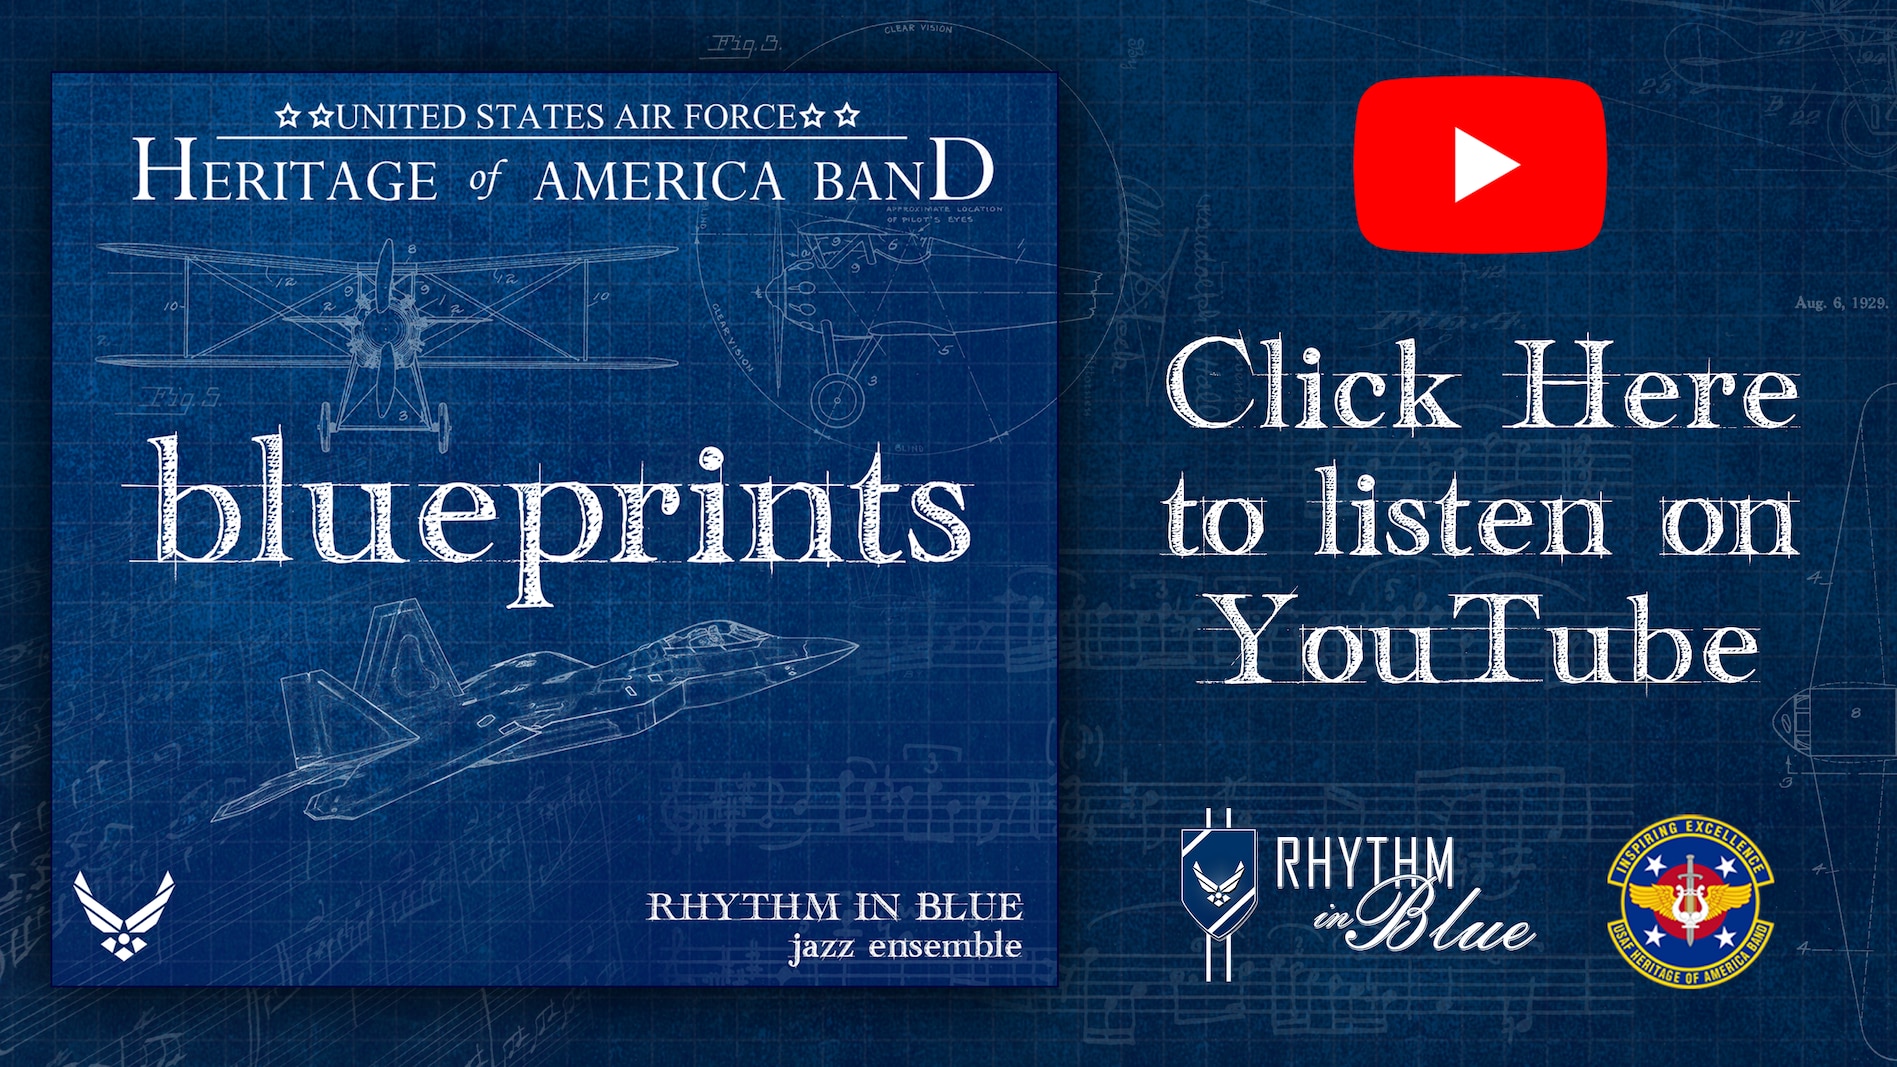 A picture of the new album Blueprints by Rhythm in Blue with a link to listen to the playlist on YouTube